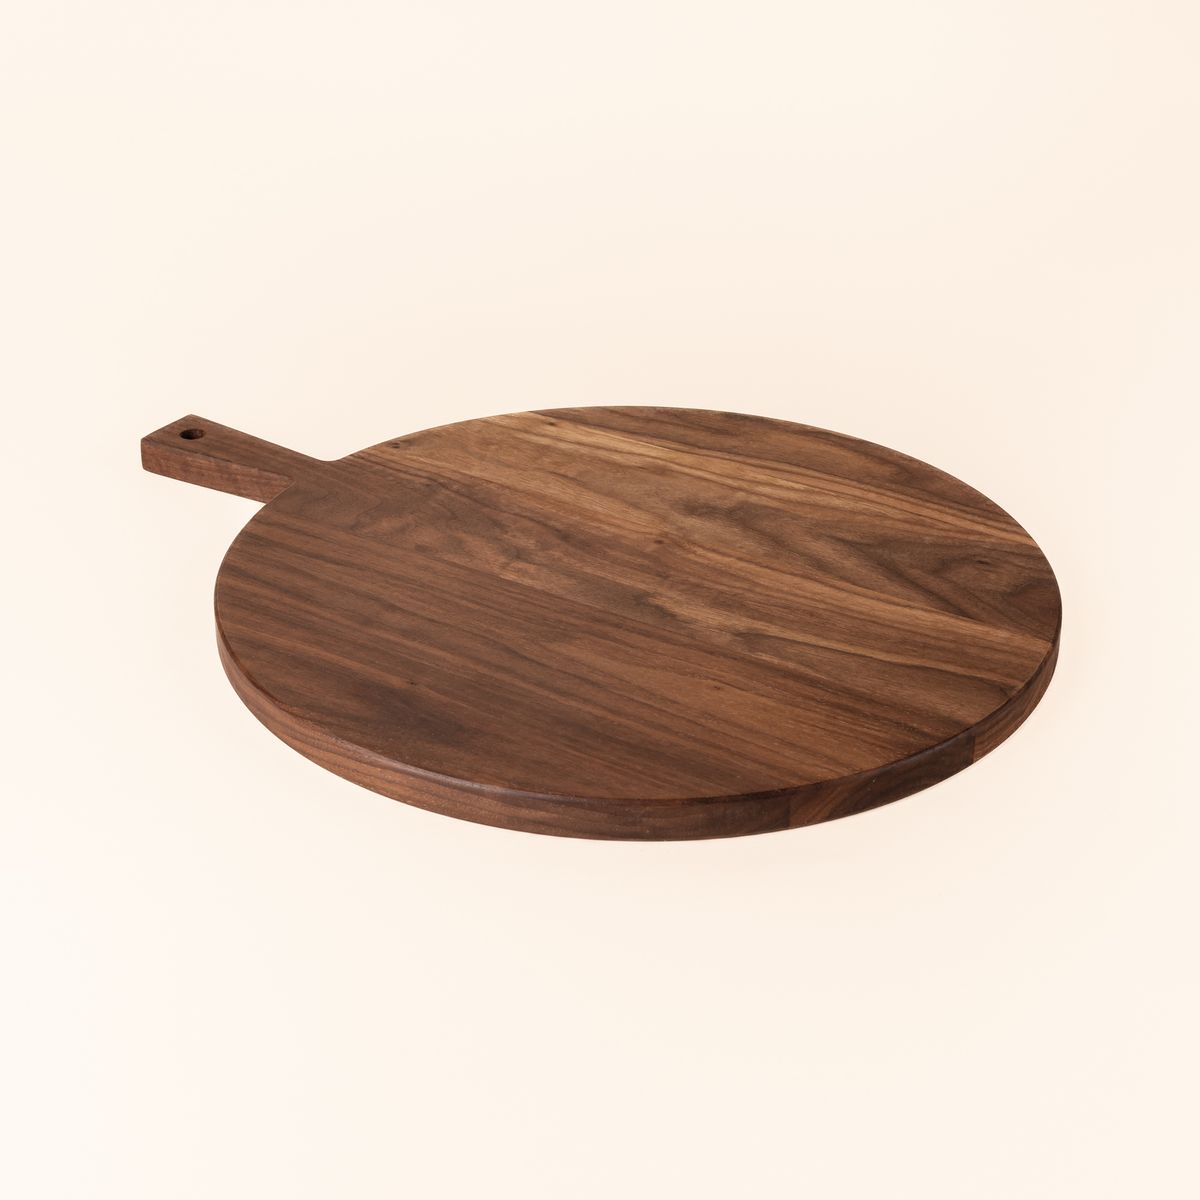 A round wooden serving board with a short rectangular handle with a hole for hanging